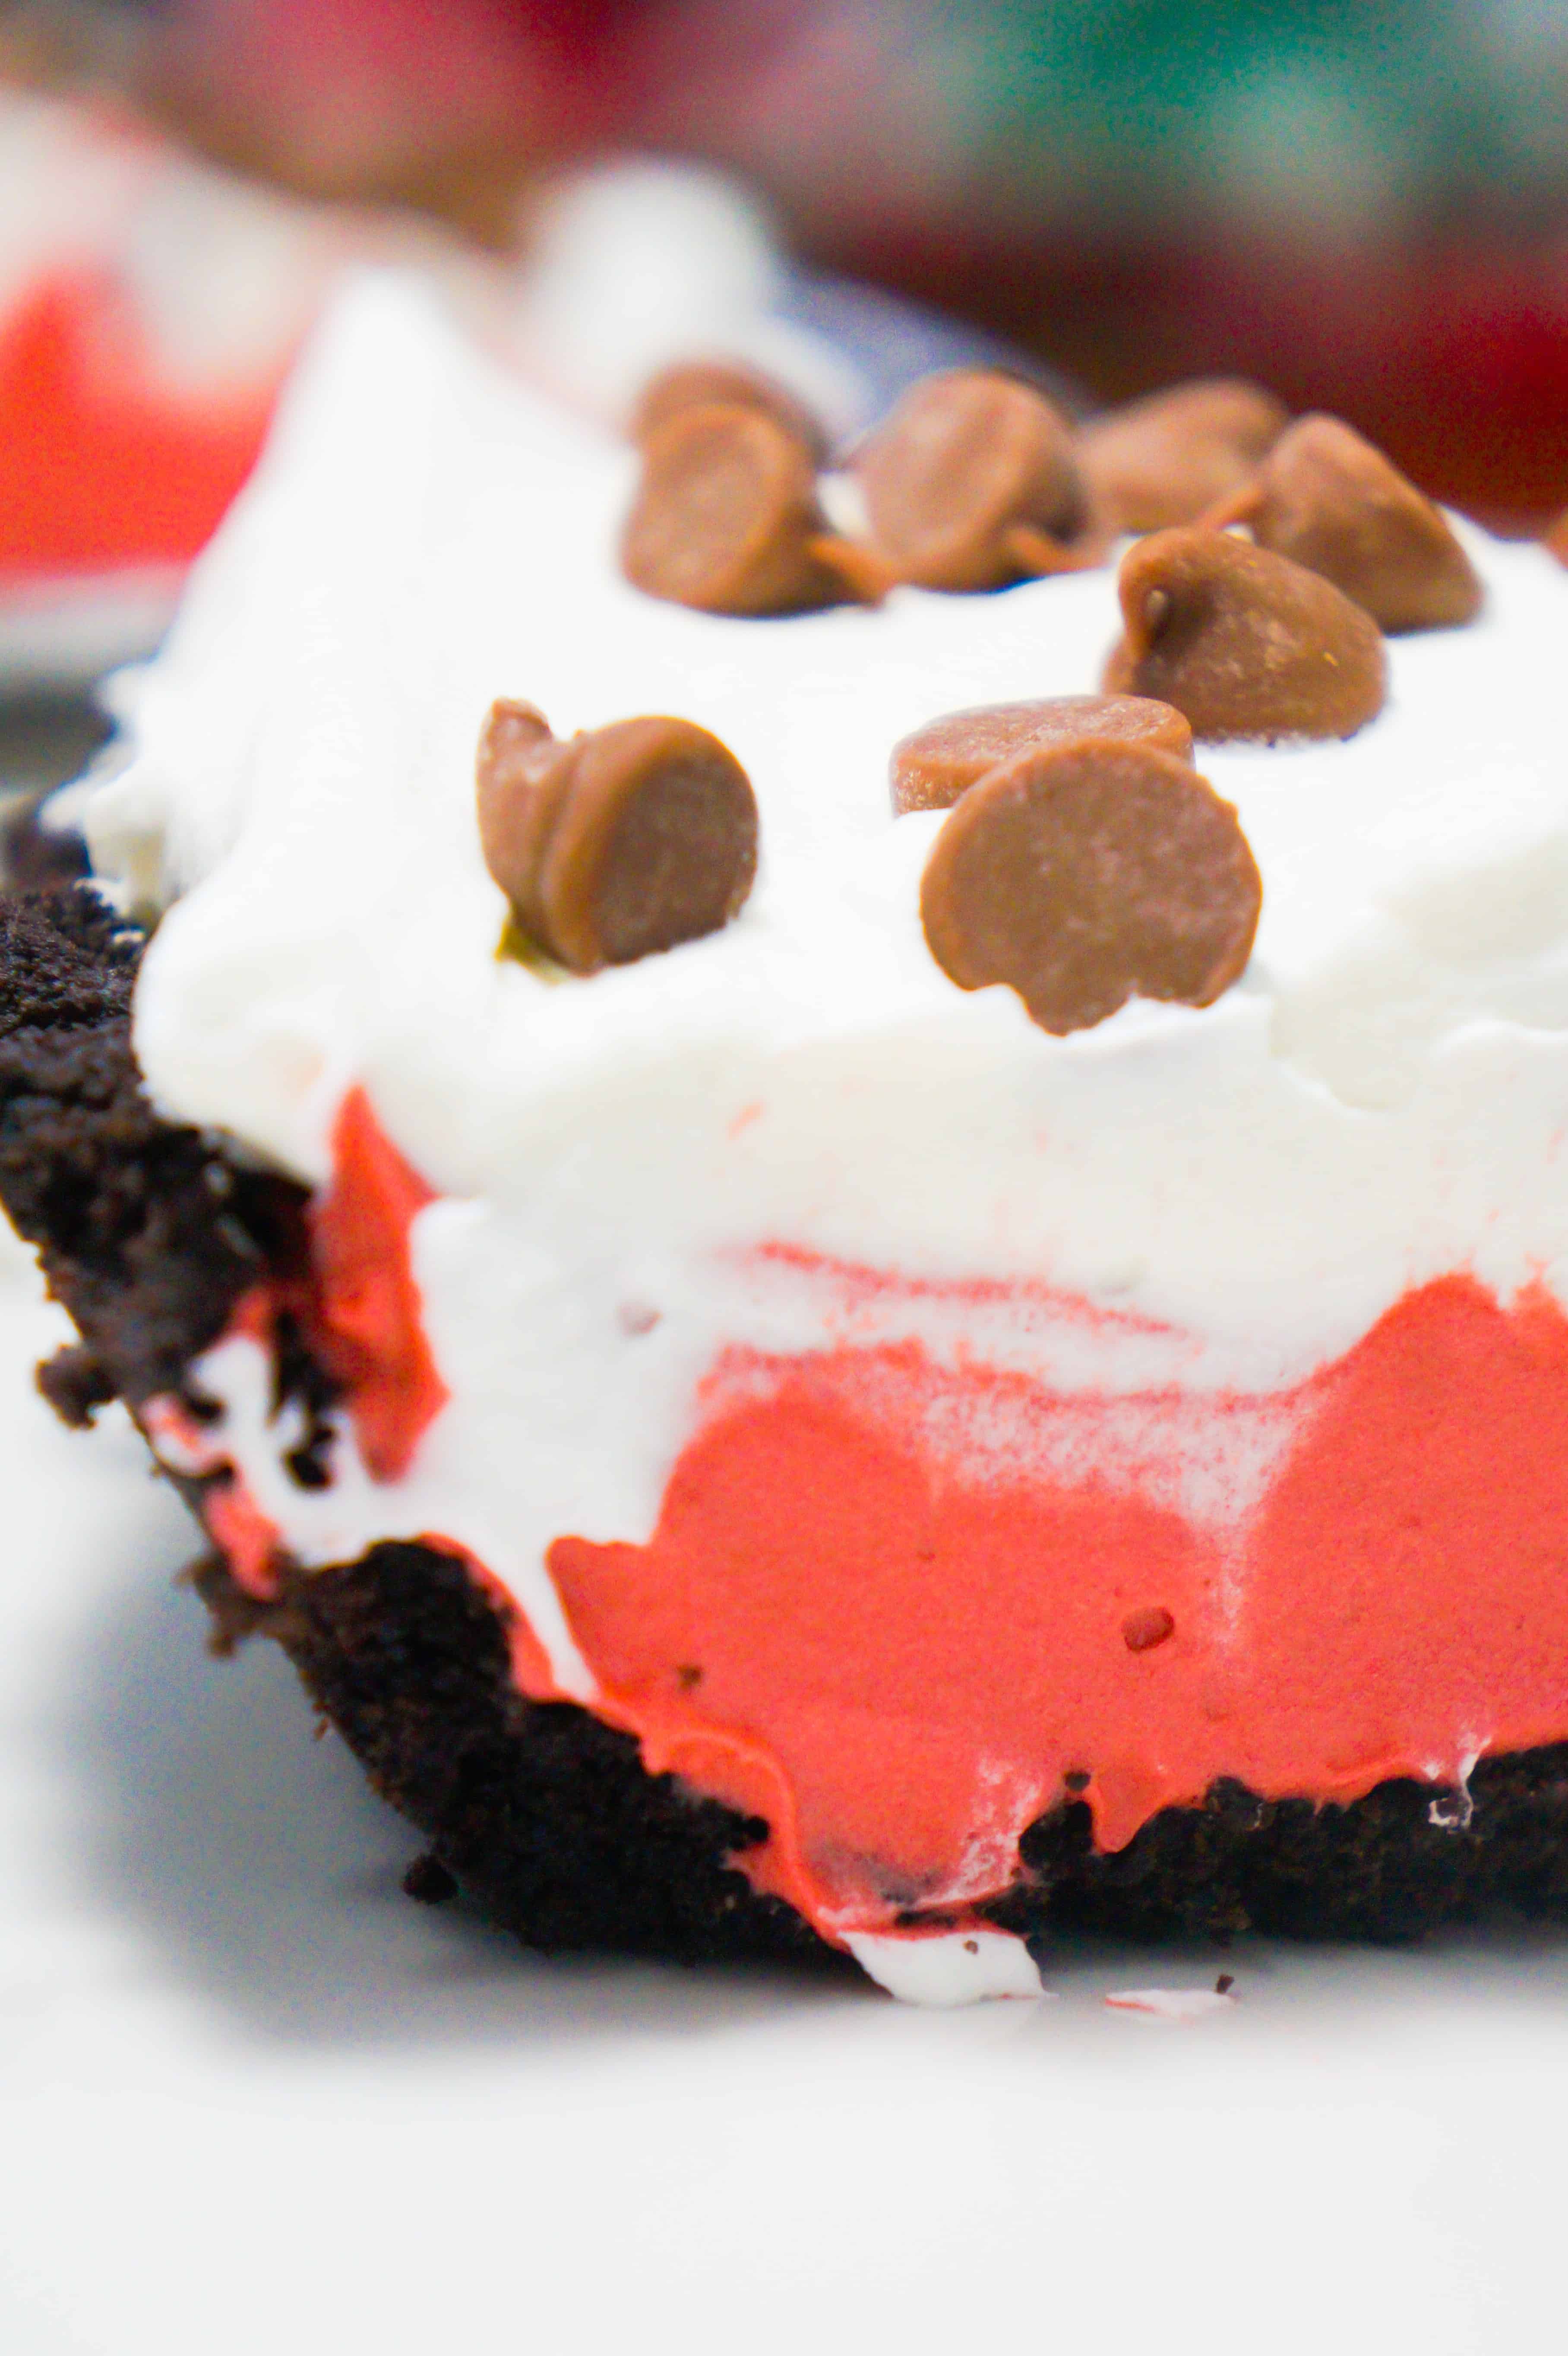 This red velvet pie is an easy no bake dessert recipe using instant pudding mix.